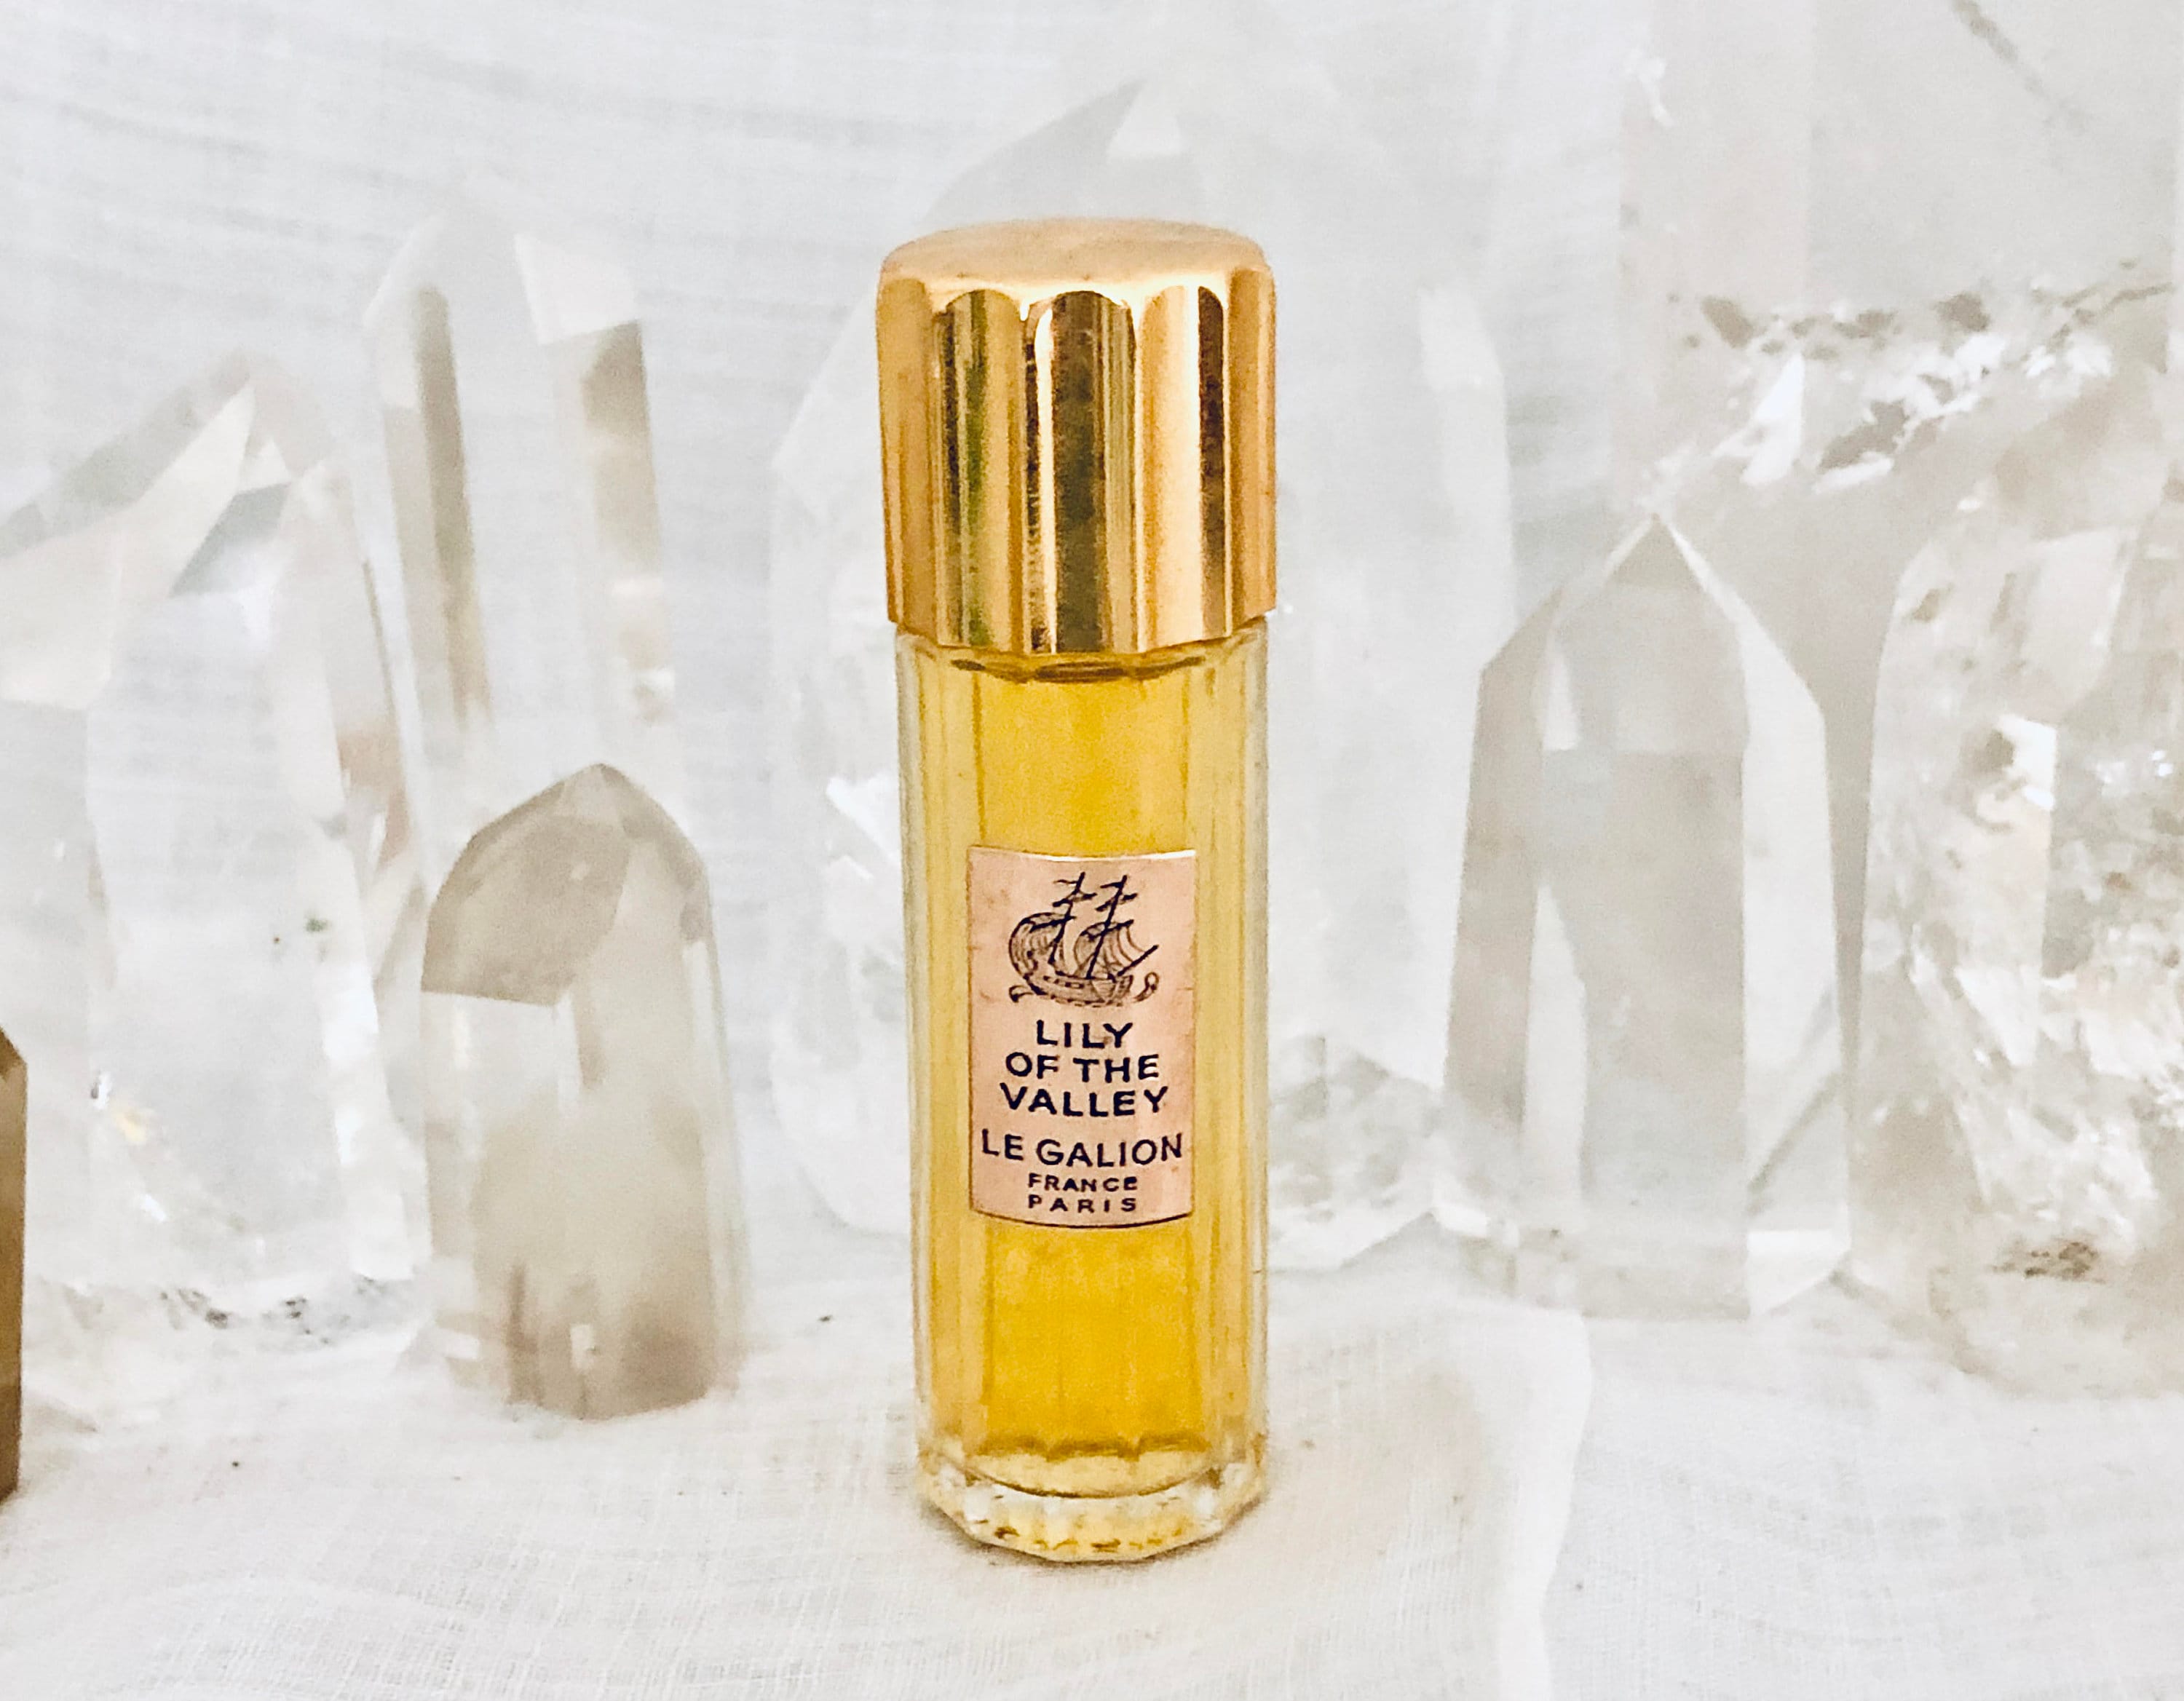 Le Galion Lily of the Valley Muguet 7.5 ml. or 0.25 oz. - Etsy 日本